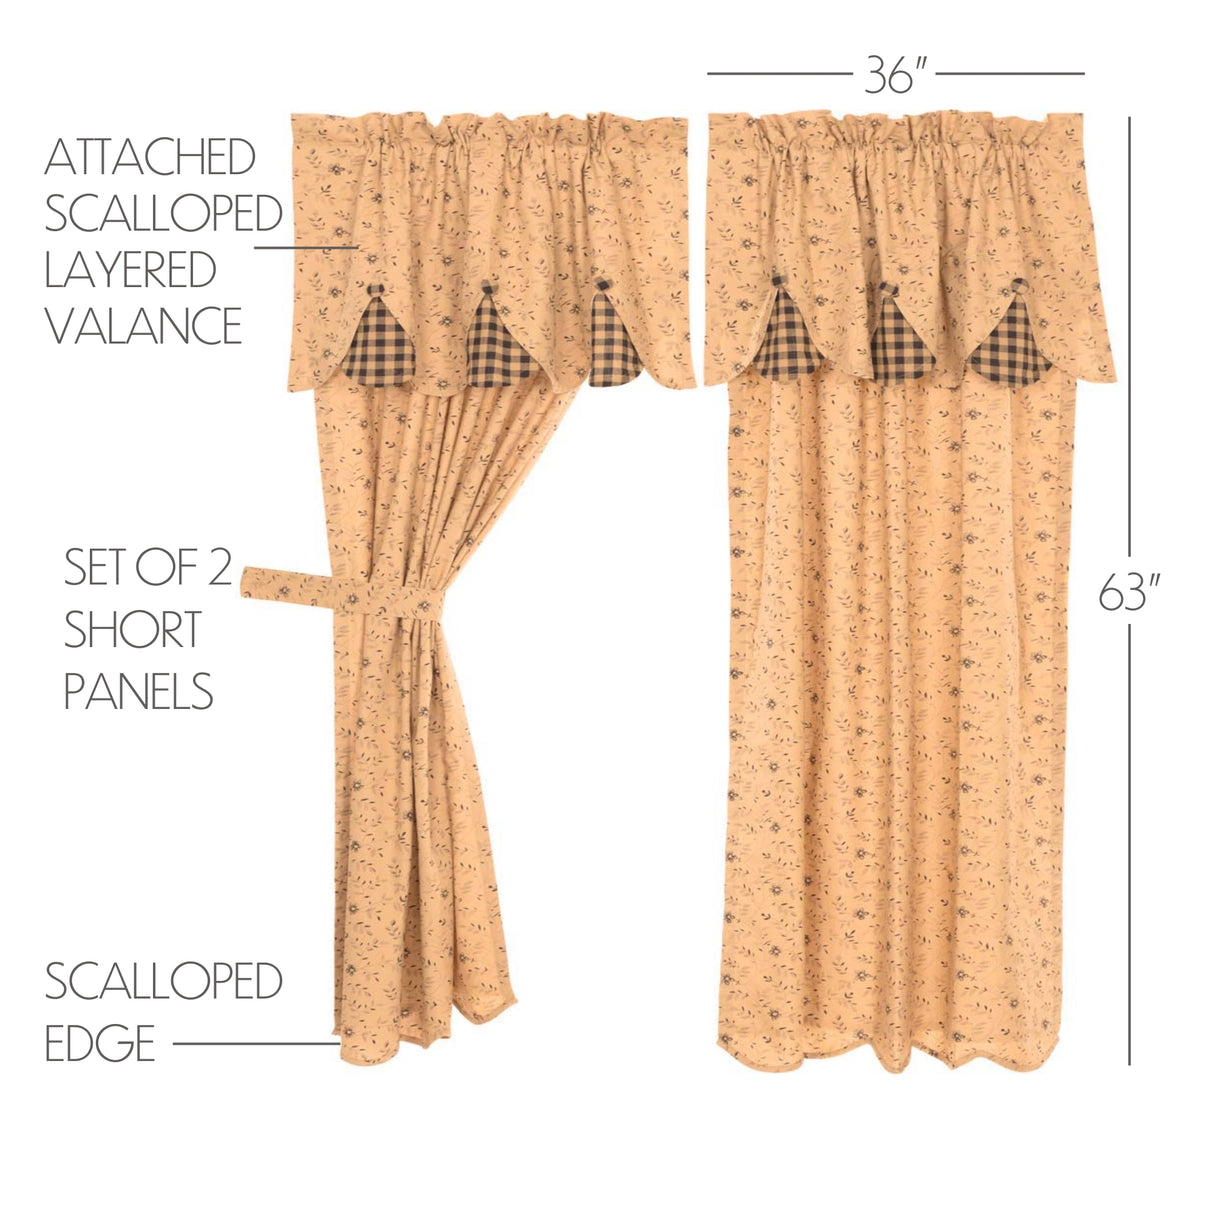 39476-Maisie-Short-Panel-Attached-Scalloped-Layered-Valance-Set-of-2-63x36-image-1